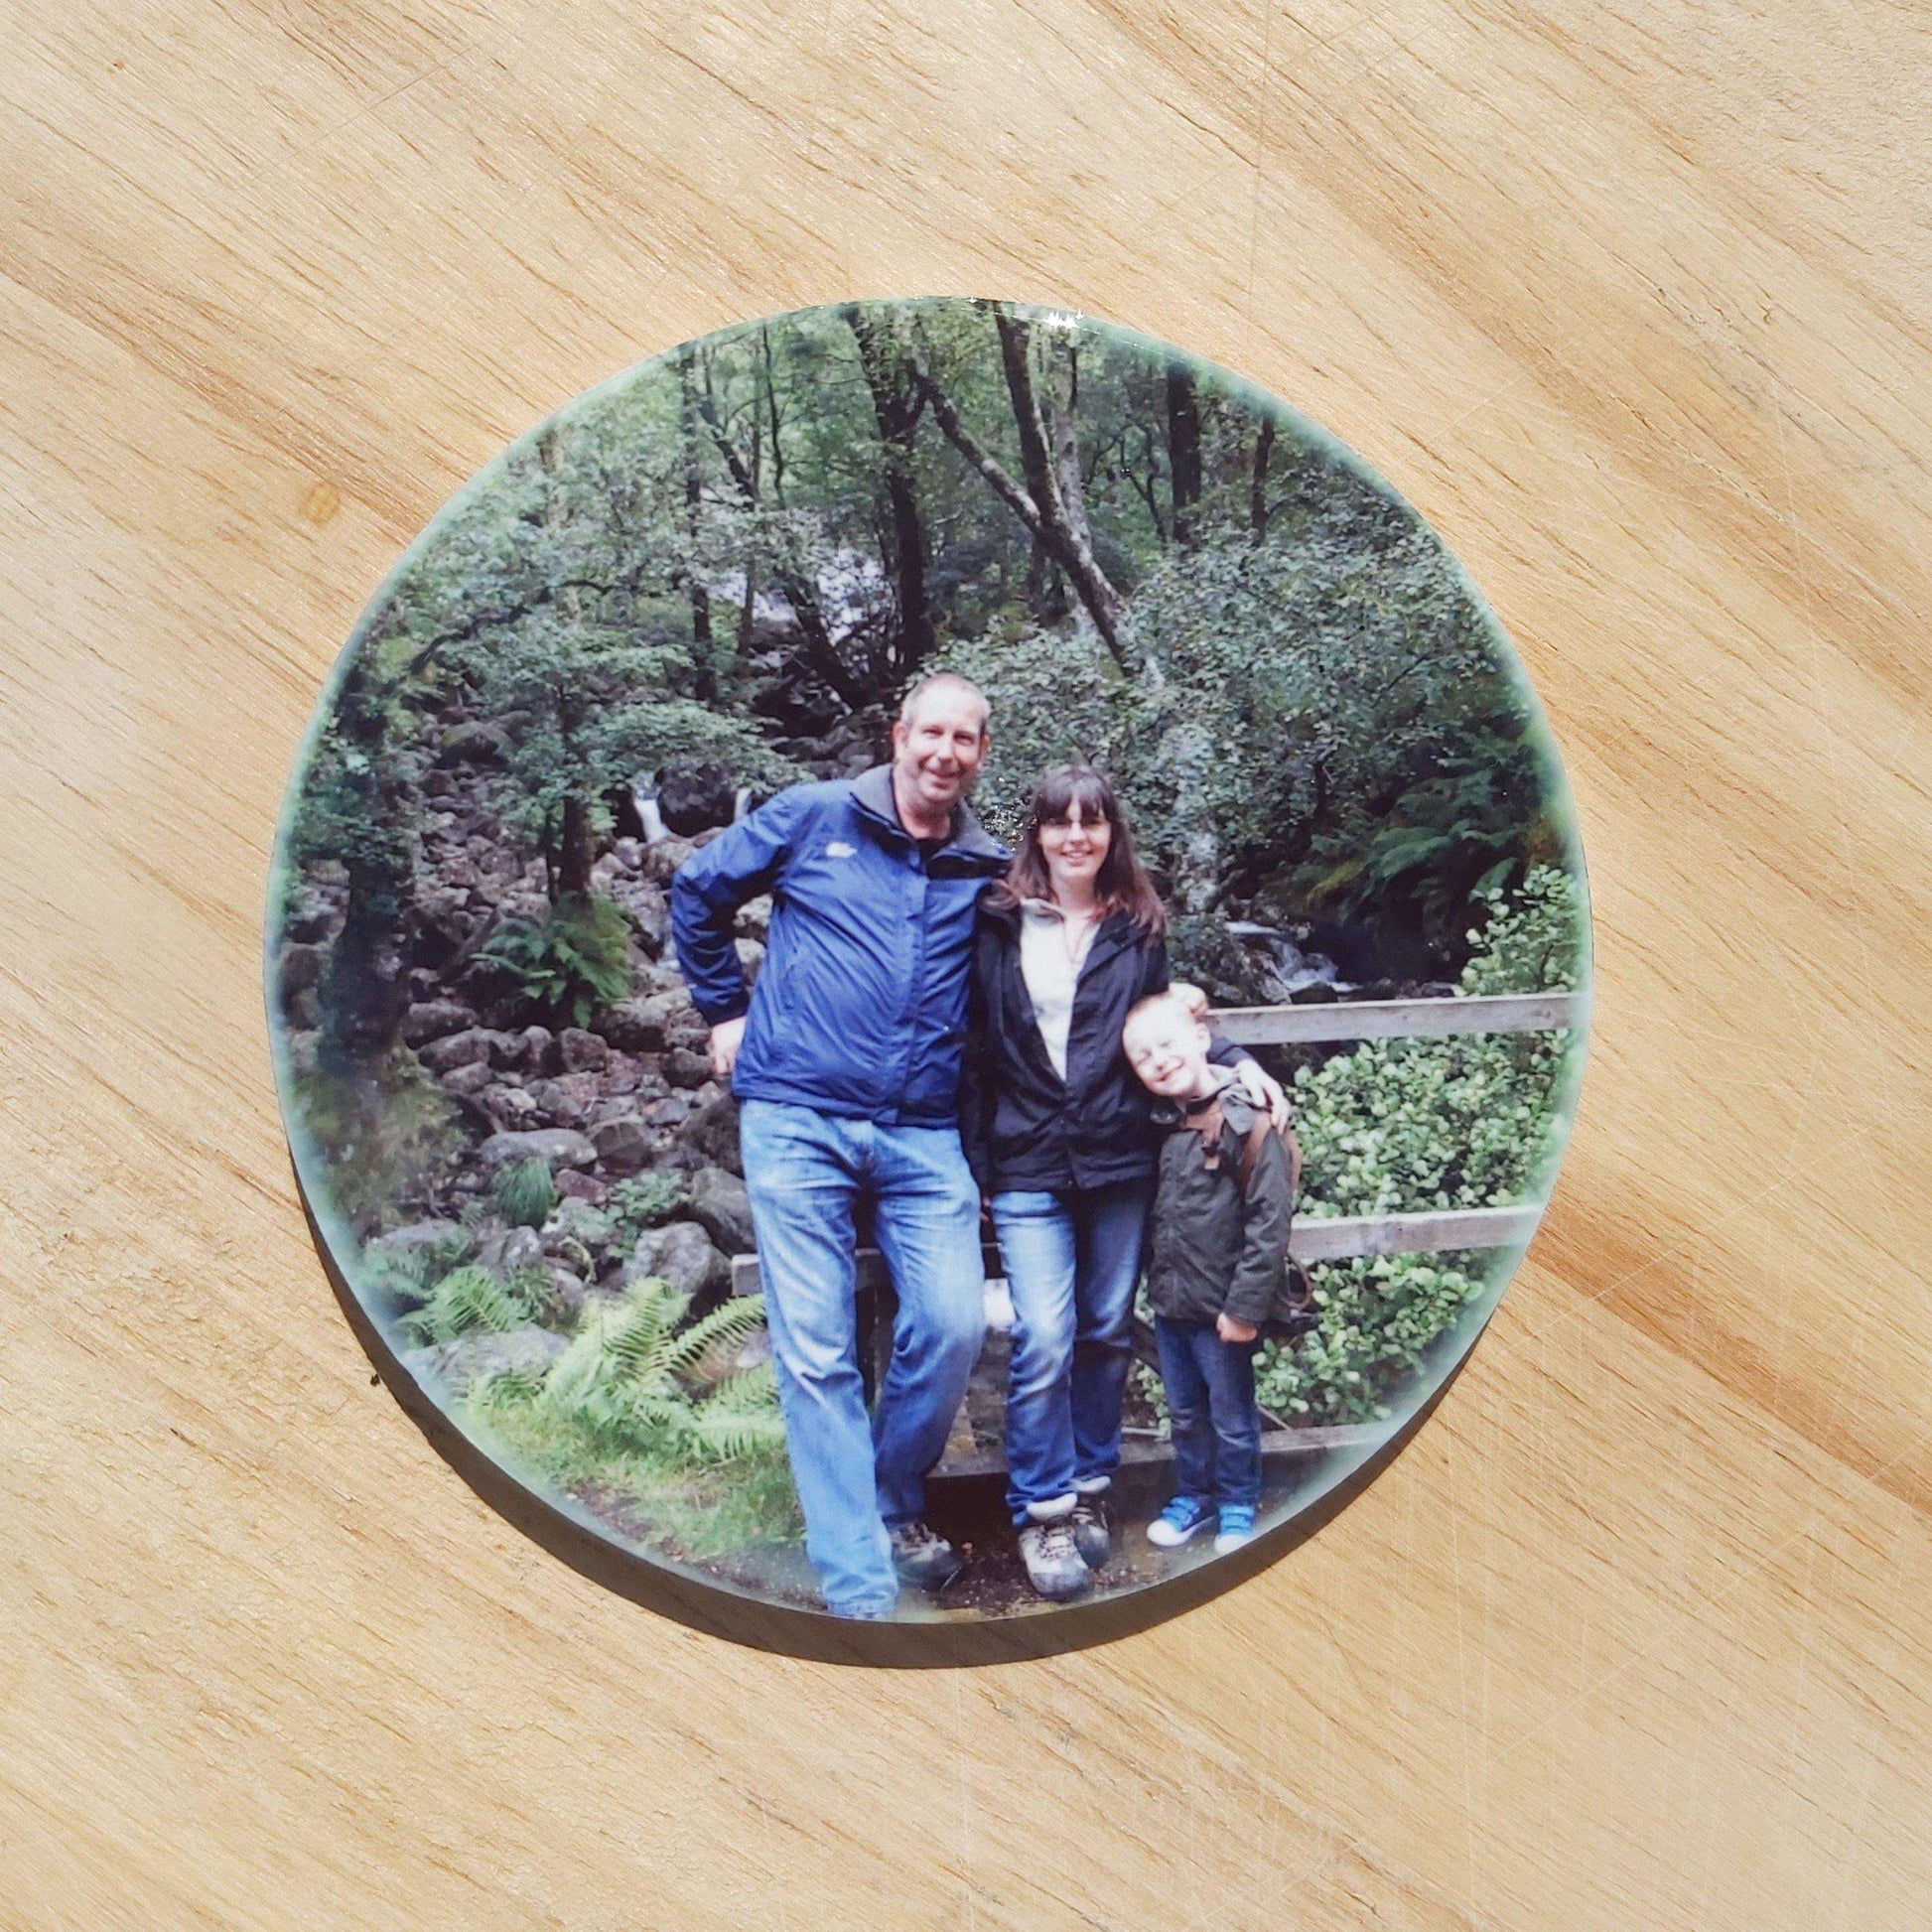 ceramic photo coaster - picture coaster - gift to give